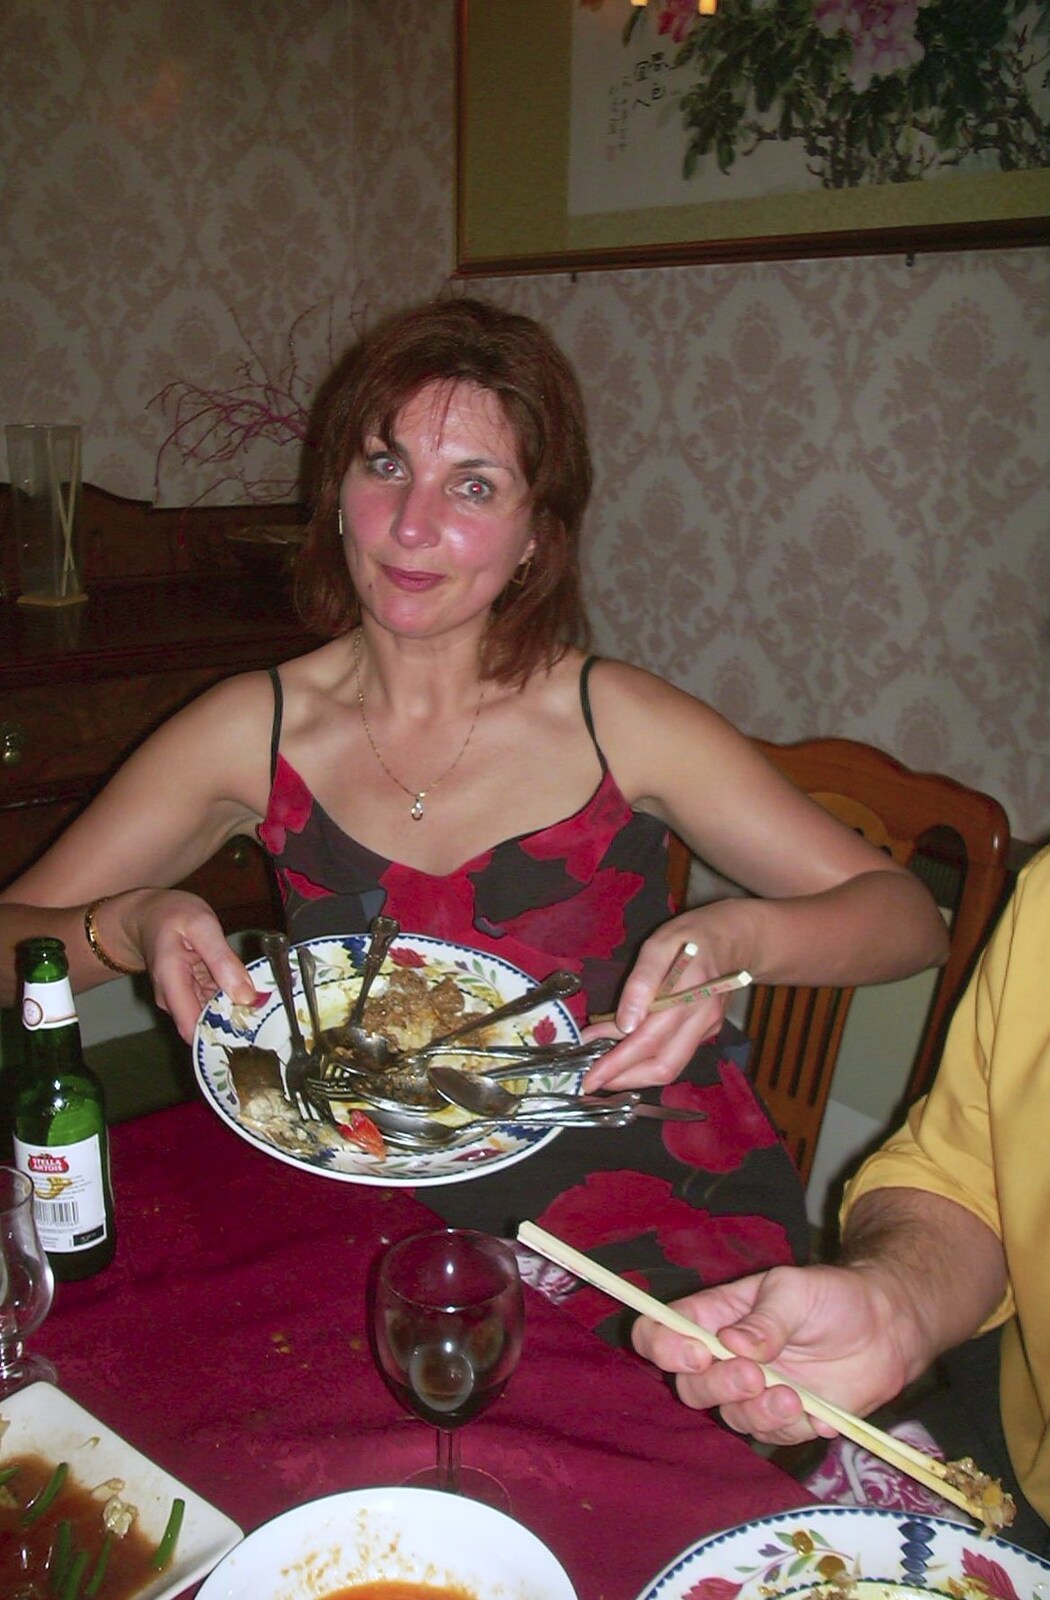 Anne offers up her plate from Anne's Satis House Night, Yoxford, Suffolk - 11th March 2003